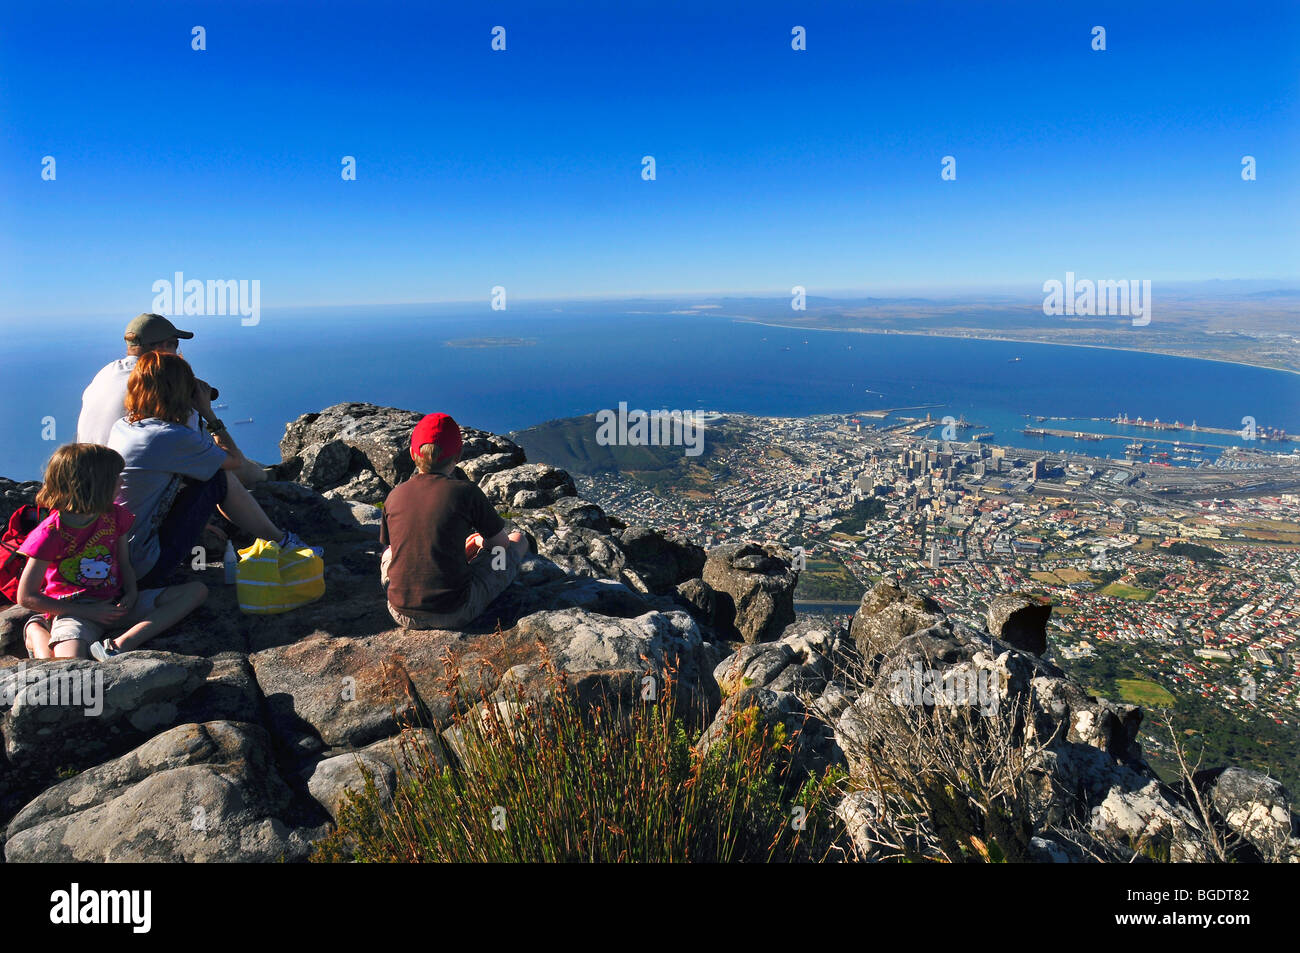 A family admiring the view of cape town from the top of table mountain in south africa Stock Photo